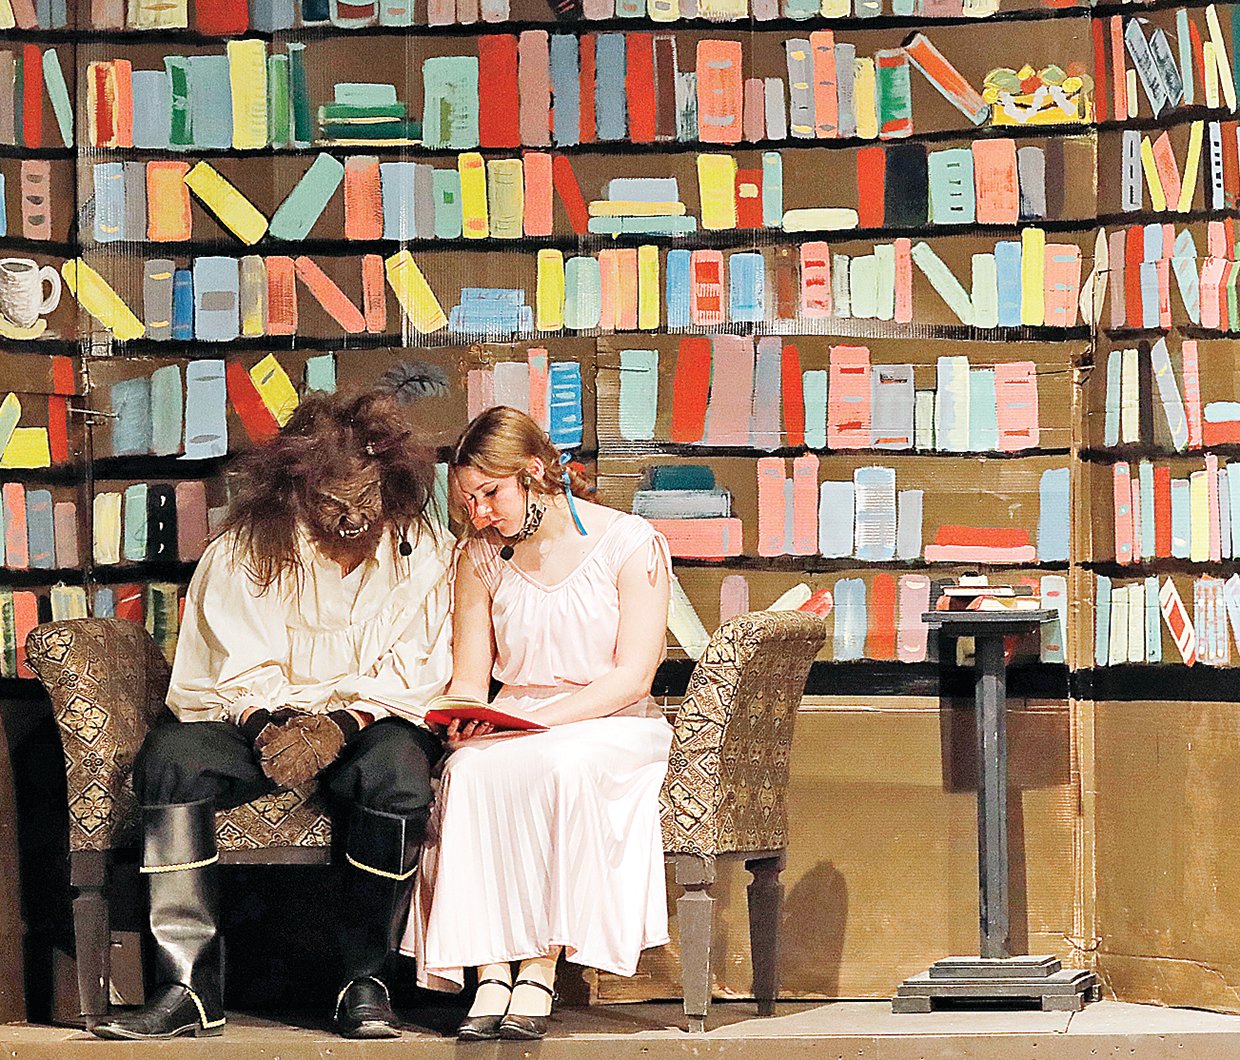 Belle, played by Sidney Marshall, reads to the Beast, Bryce Fairchild.